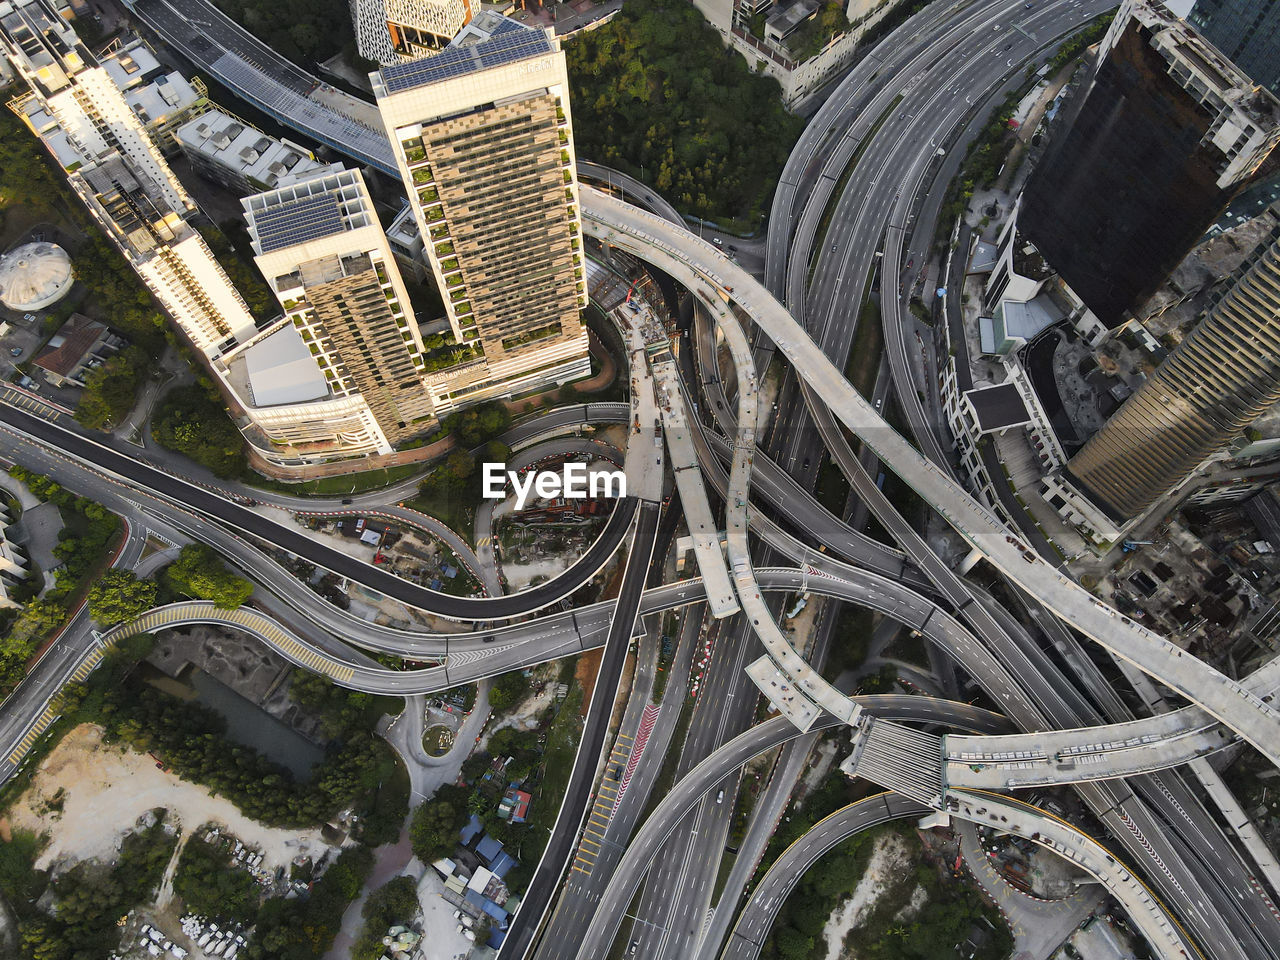 Aerial view of a complex interchange roads with some still in construction. editorial